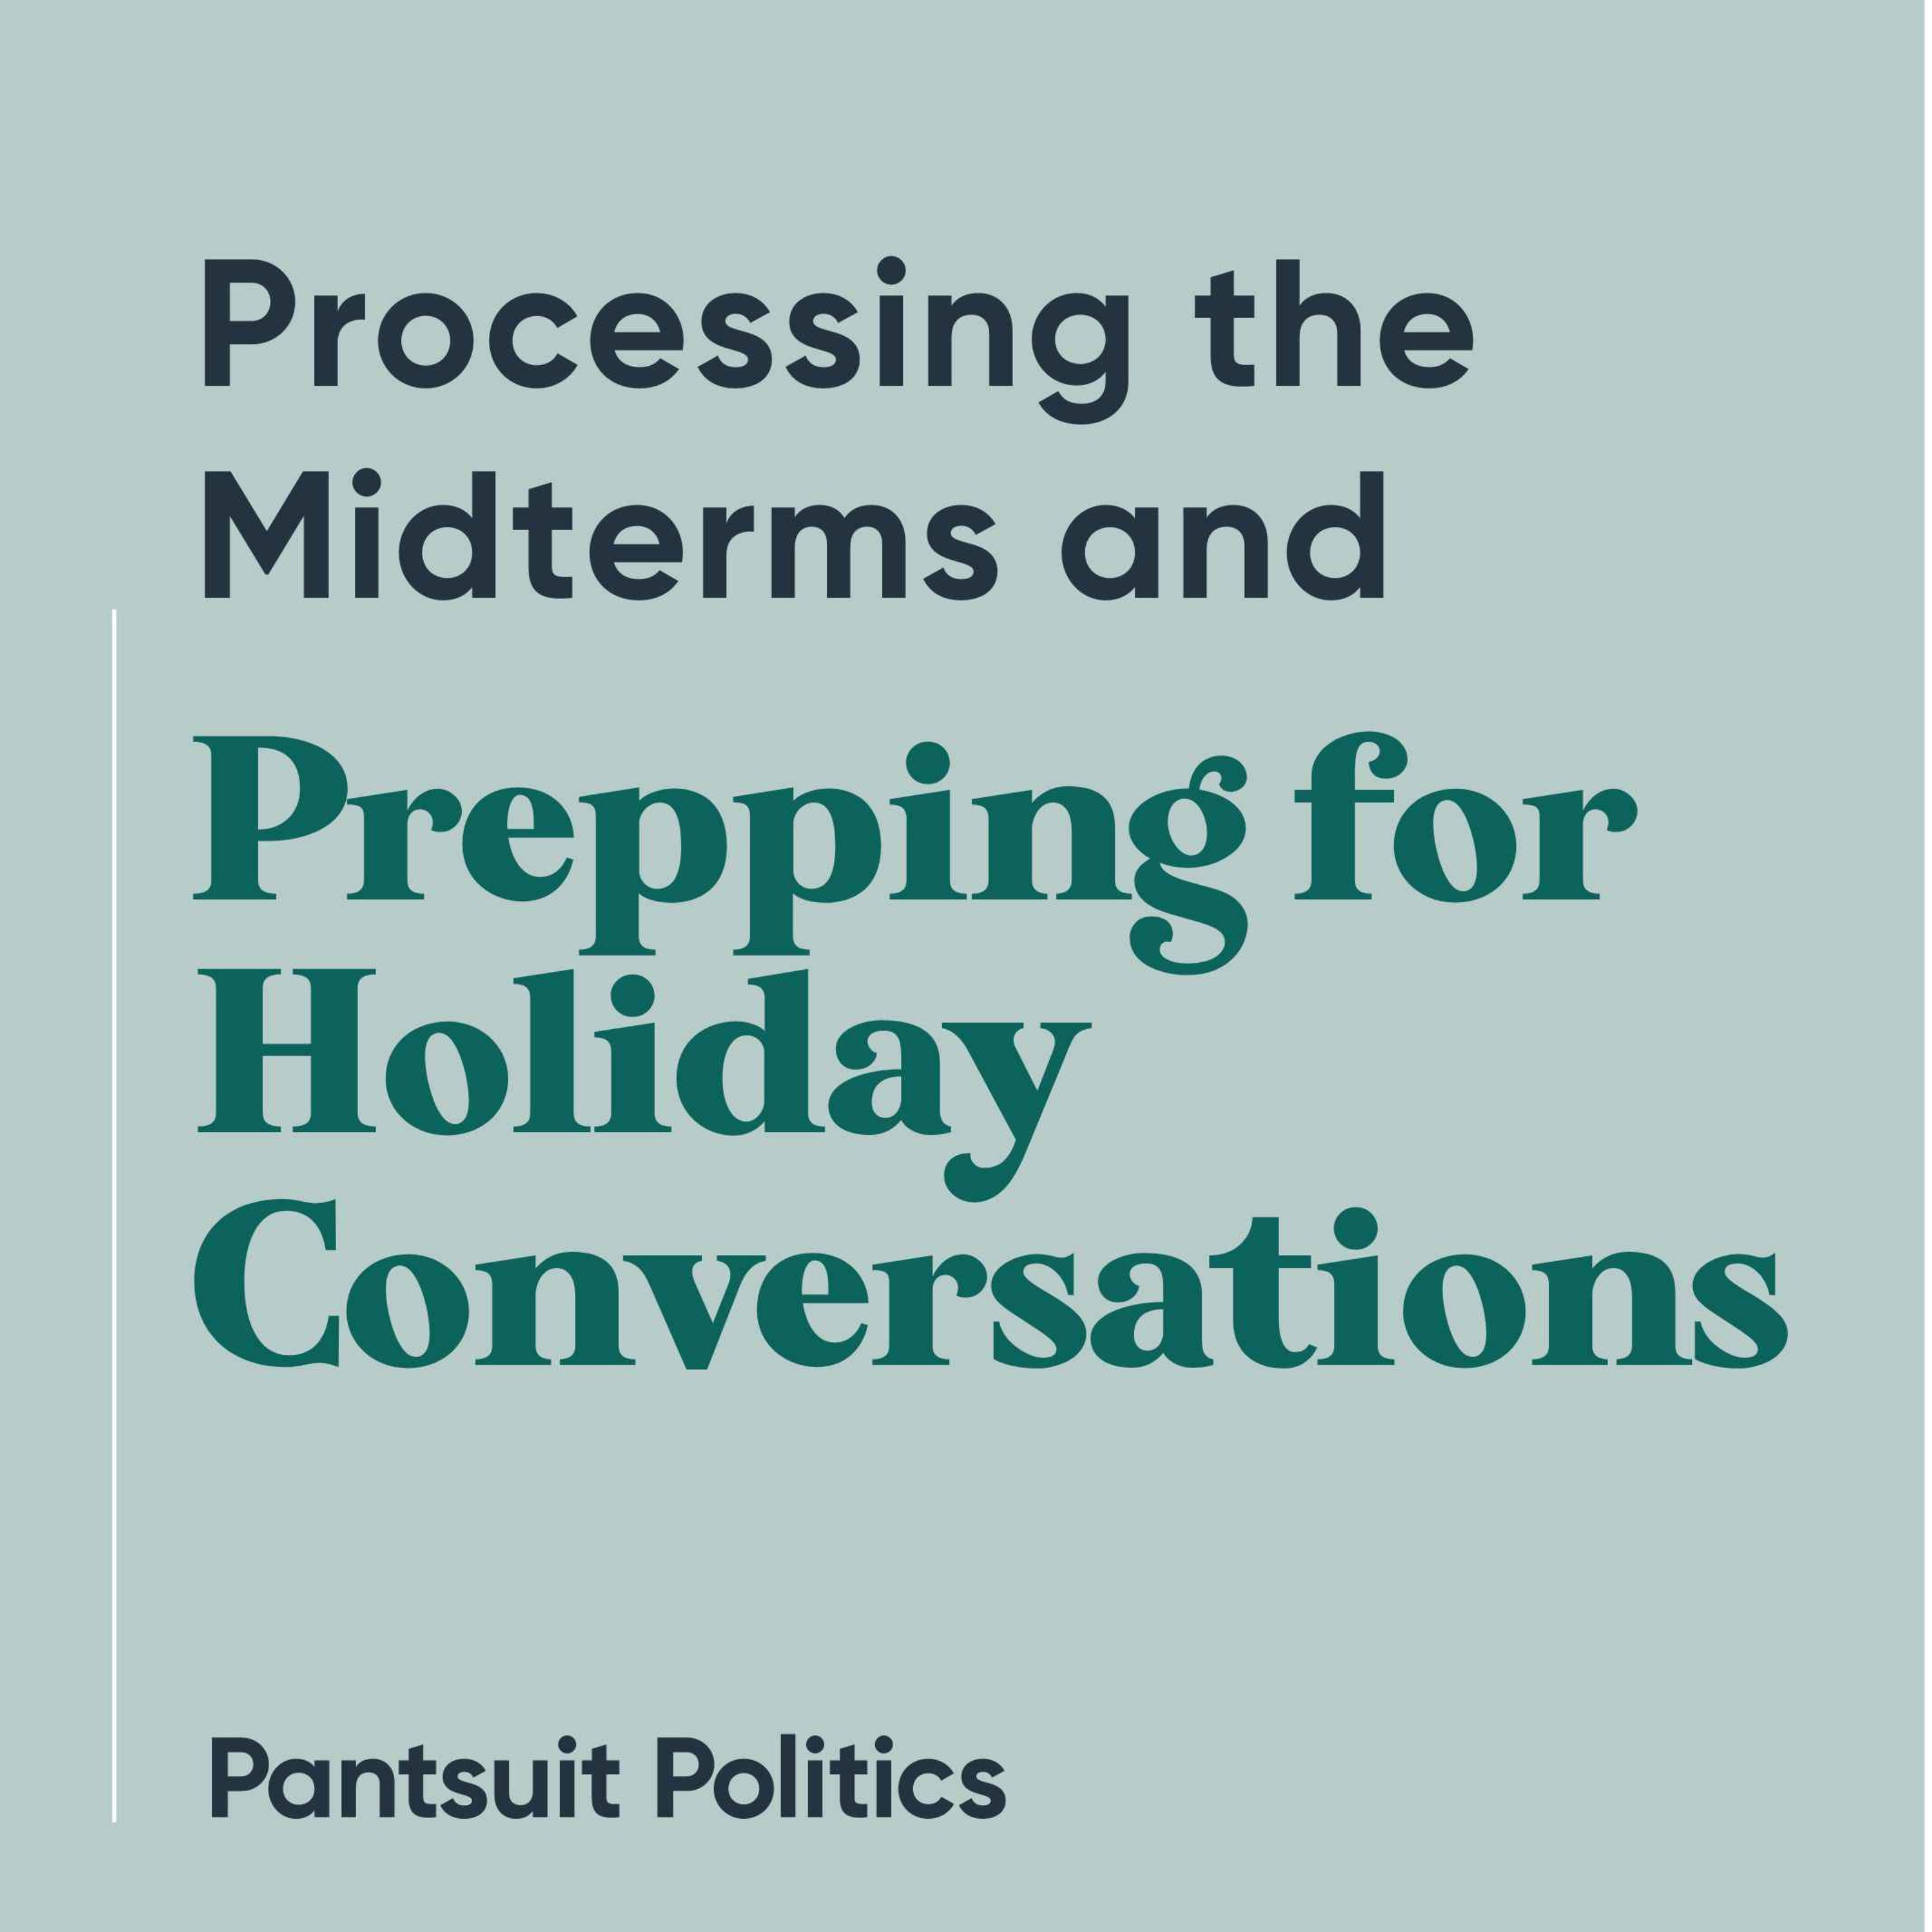 Processing the Midterms and Prepping for Holiday Conversations